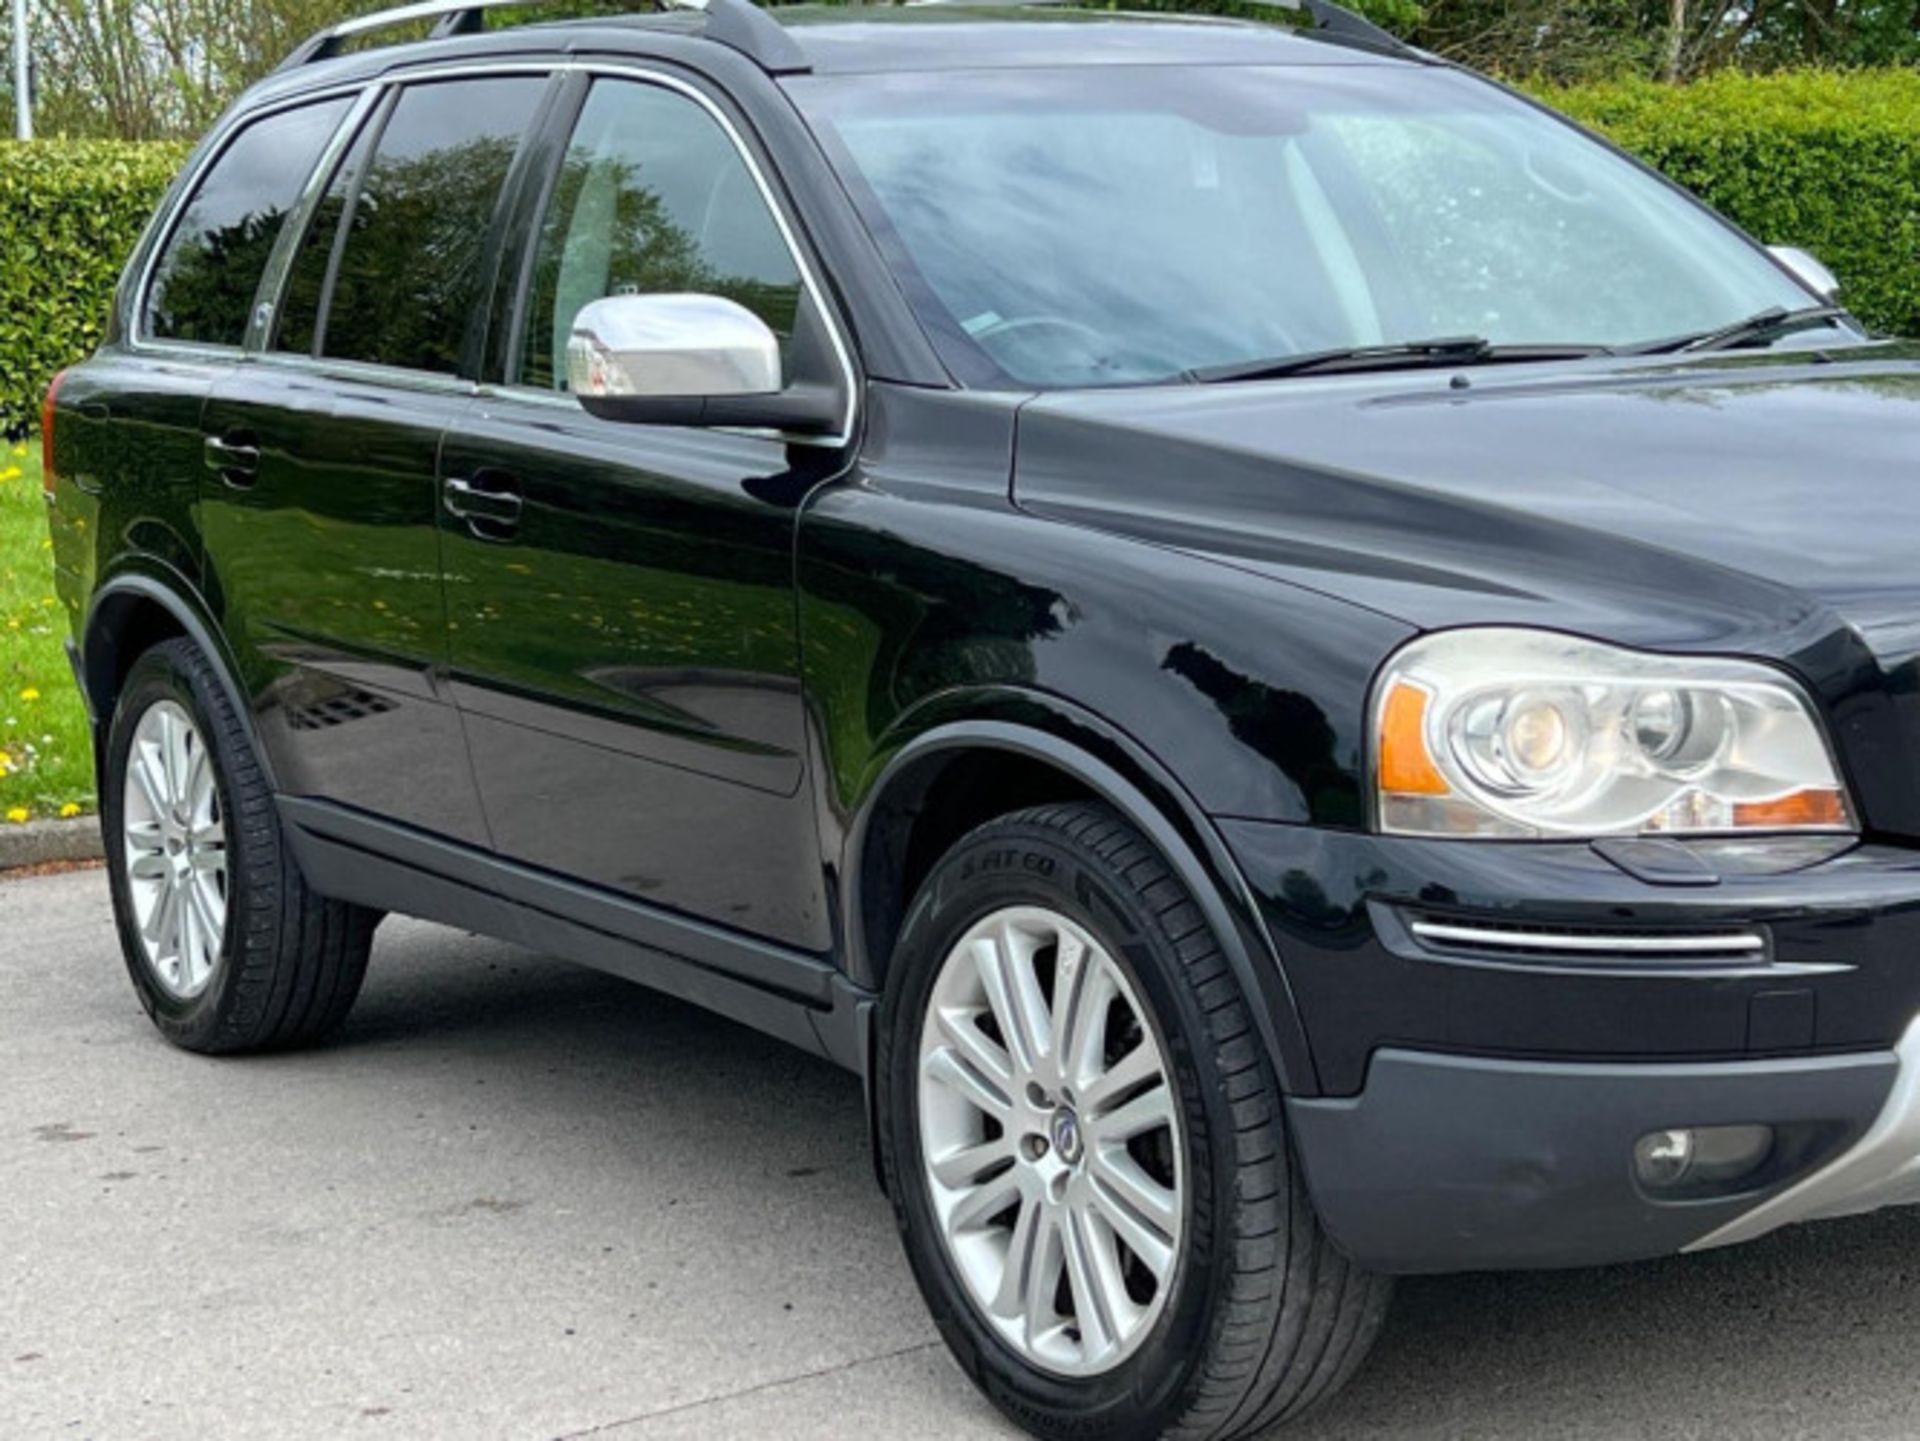 VOLVO XC90 2.4 D5 EXECUTIVE GEARTRONIC AWD, 5DR >>--NO VAT ON HAMMER--<< - Image 135 of 136